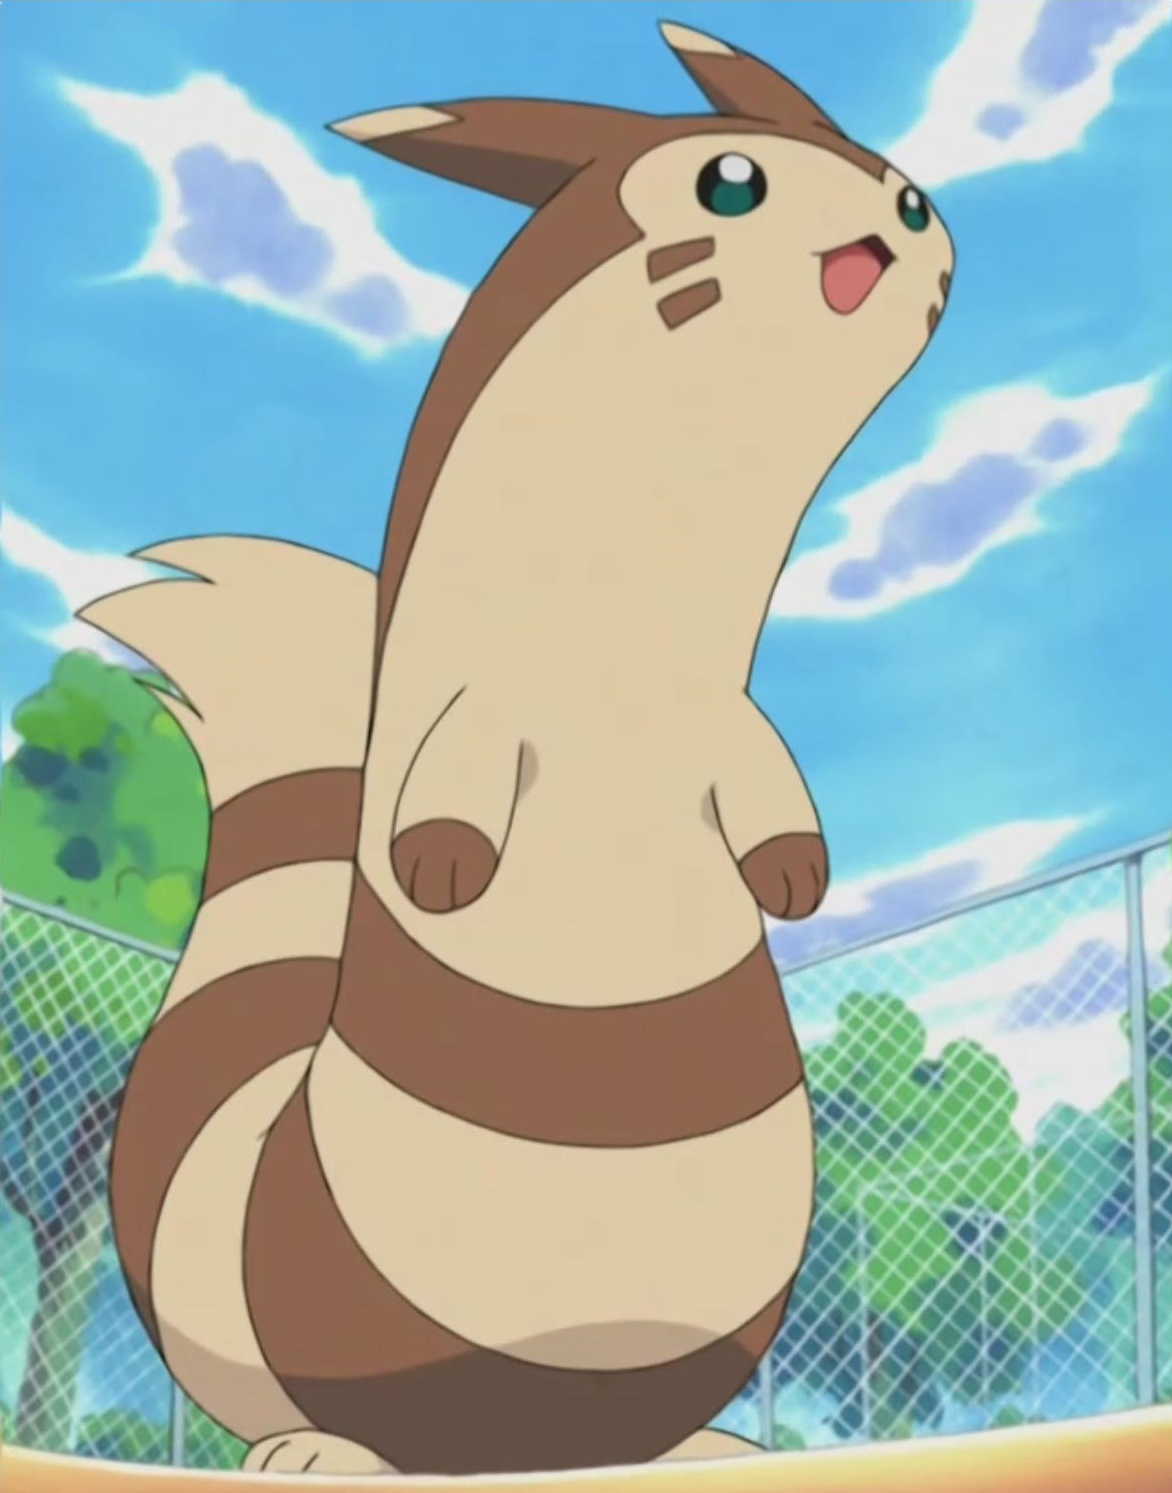 This Furret is a Normal-type Pokémon owned by Salvador. 